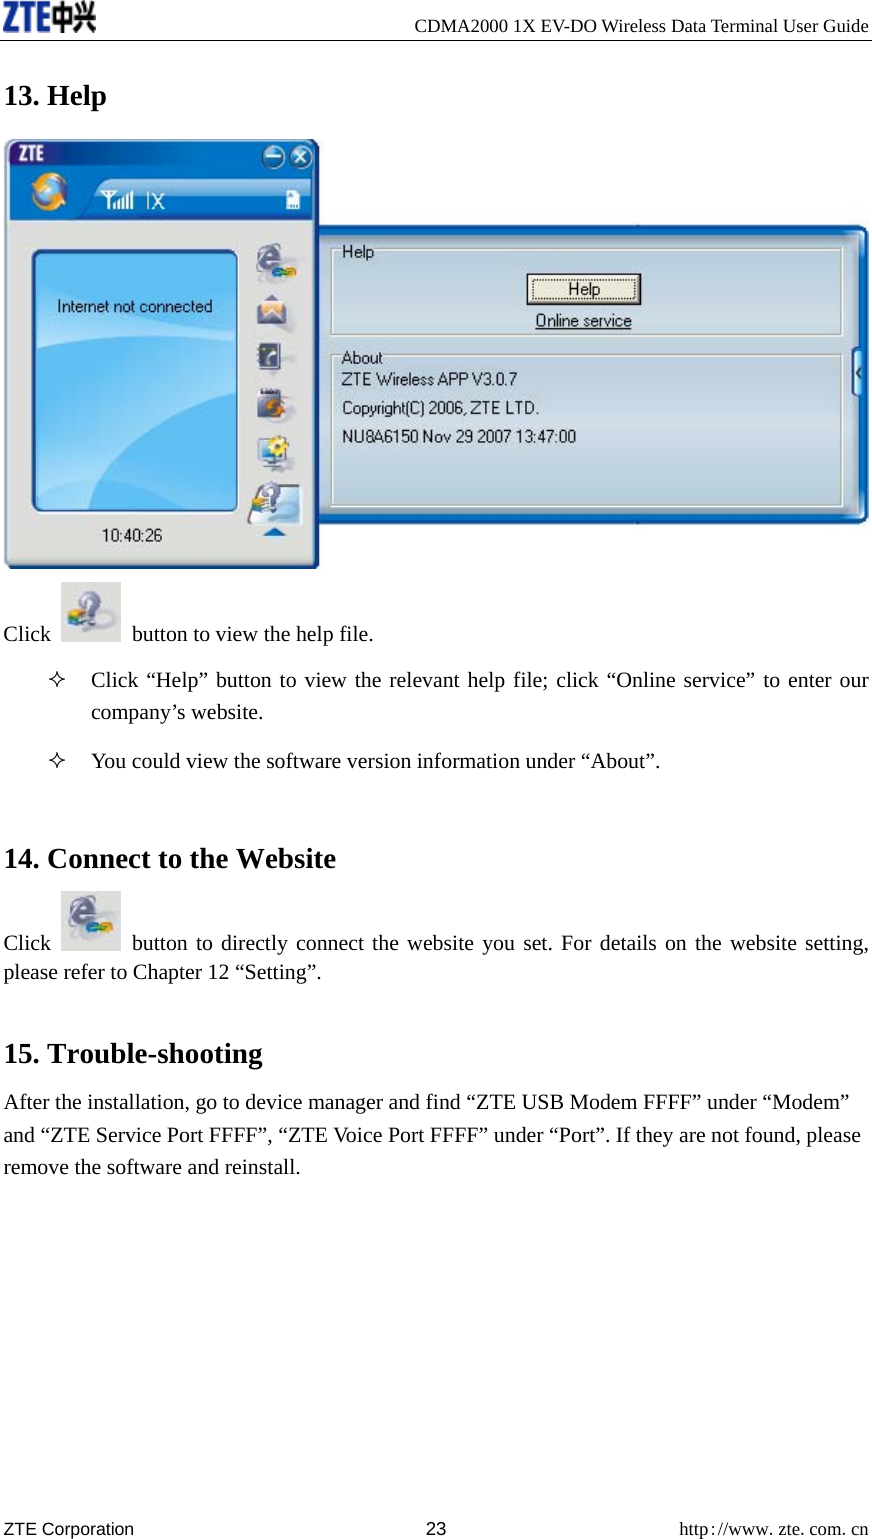     CDMA2000 1X EV-DO Wireless Data Terminal User Guide ZTE Corporation 23 http://www.zte.com.cn  13. Help  Click    button to view the help file.  Click “Help” button to view the relevant help file; click “Online service” to enter our company’s website.  You could view the software version information under “About”.  14. Connect to the Website Click   button to directly connect the website you set. For details on the website setting, please refer to Chapter 12 “Setting”.  15. Trouble-shooting After the installation, go to device manager and find “ZTE USB Modem FFFF” under “Modem” and “ZTE Service Port FFFF”, “ZTE Voice Port FFFF” under “Port”. If they are not found, please remove the software and reinstall. 